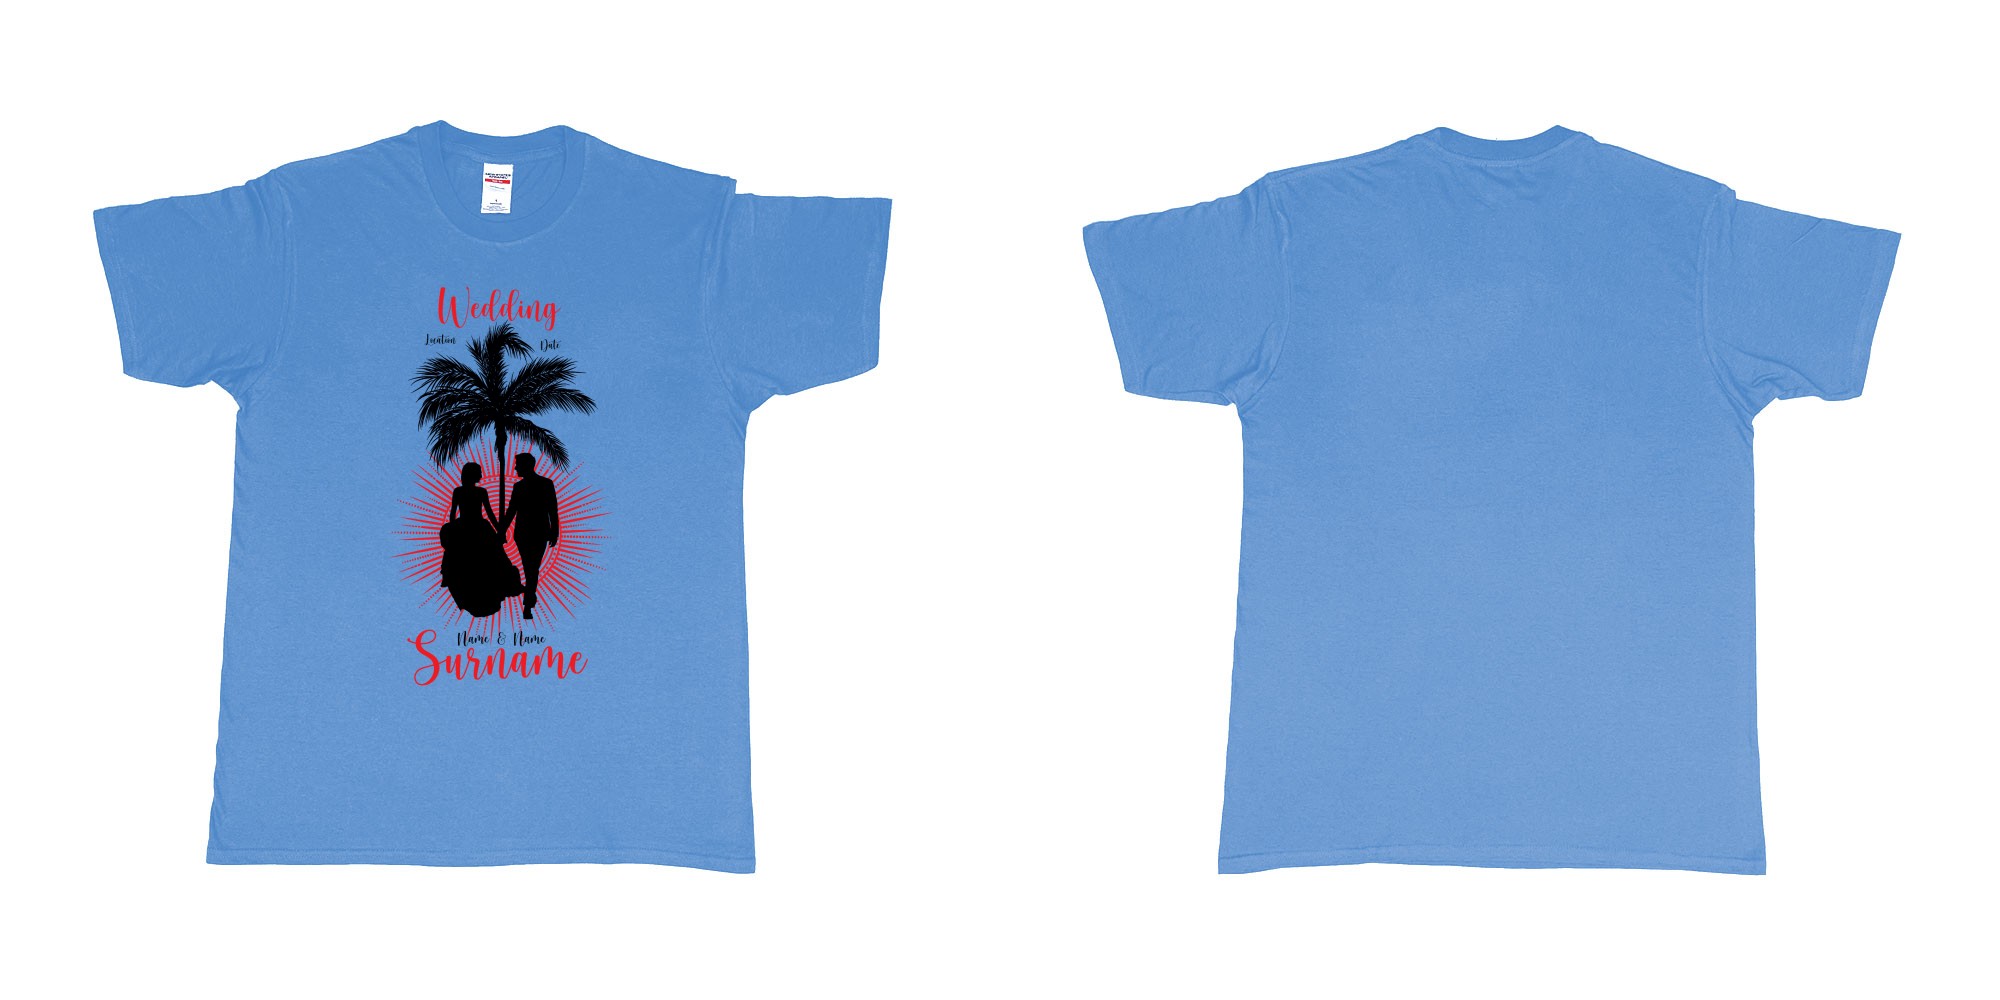 Custom tshirt design wedding palm sun bali in fabric color carolina-blue choice your own text made in Bali by The Pirate Way